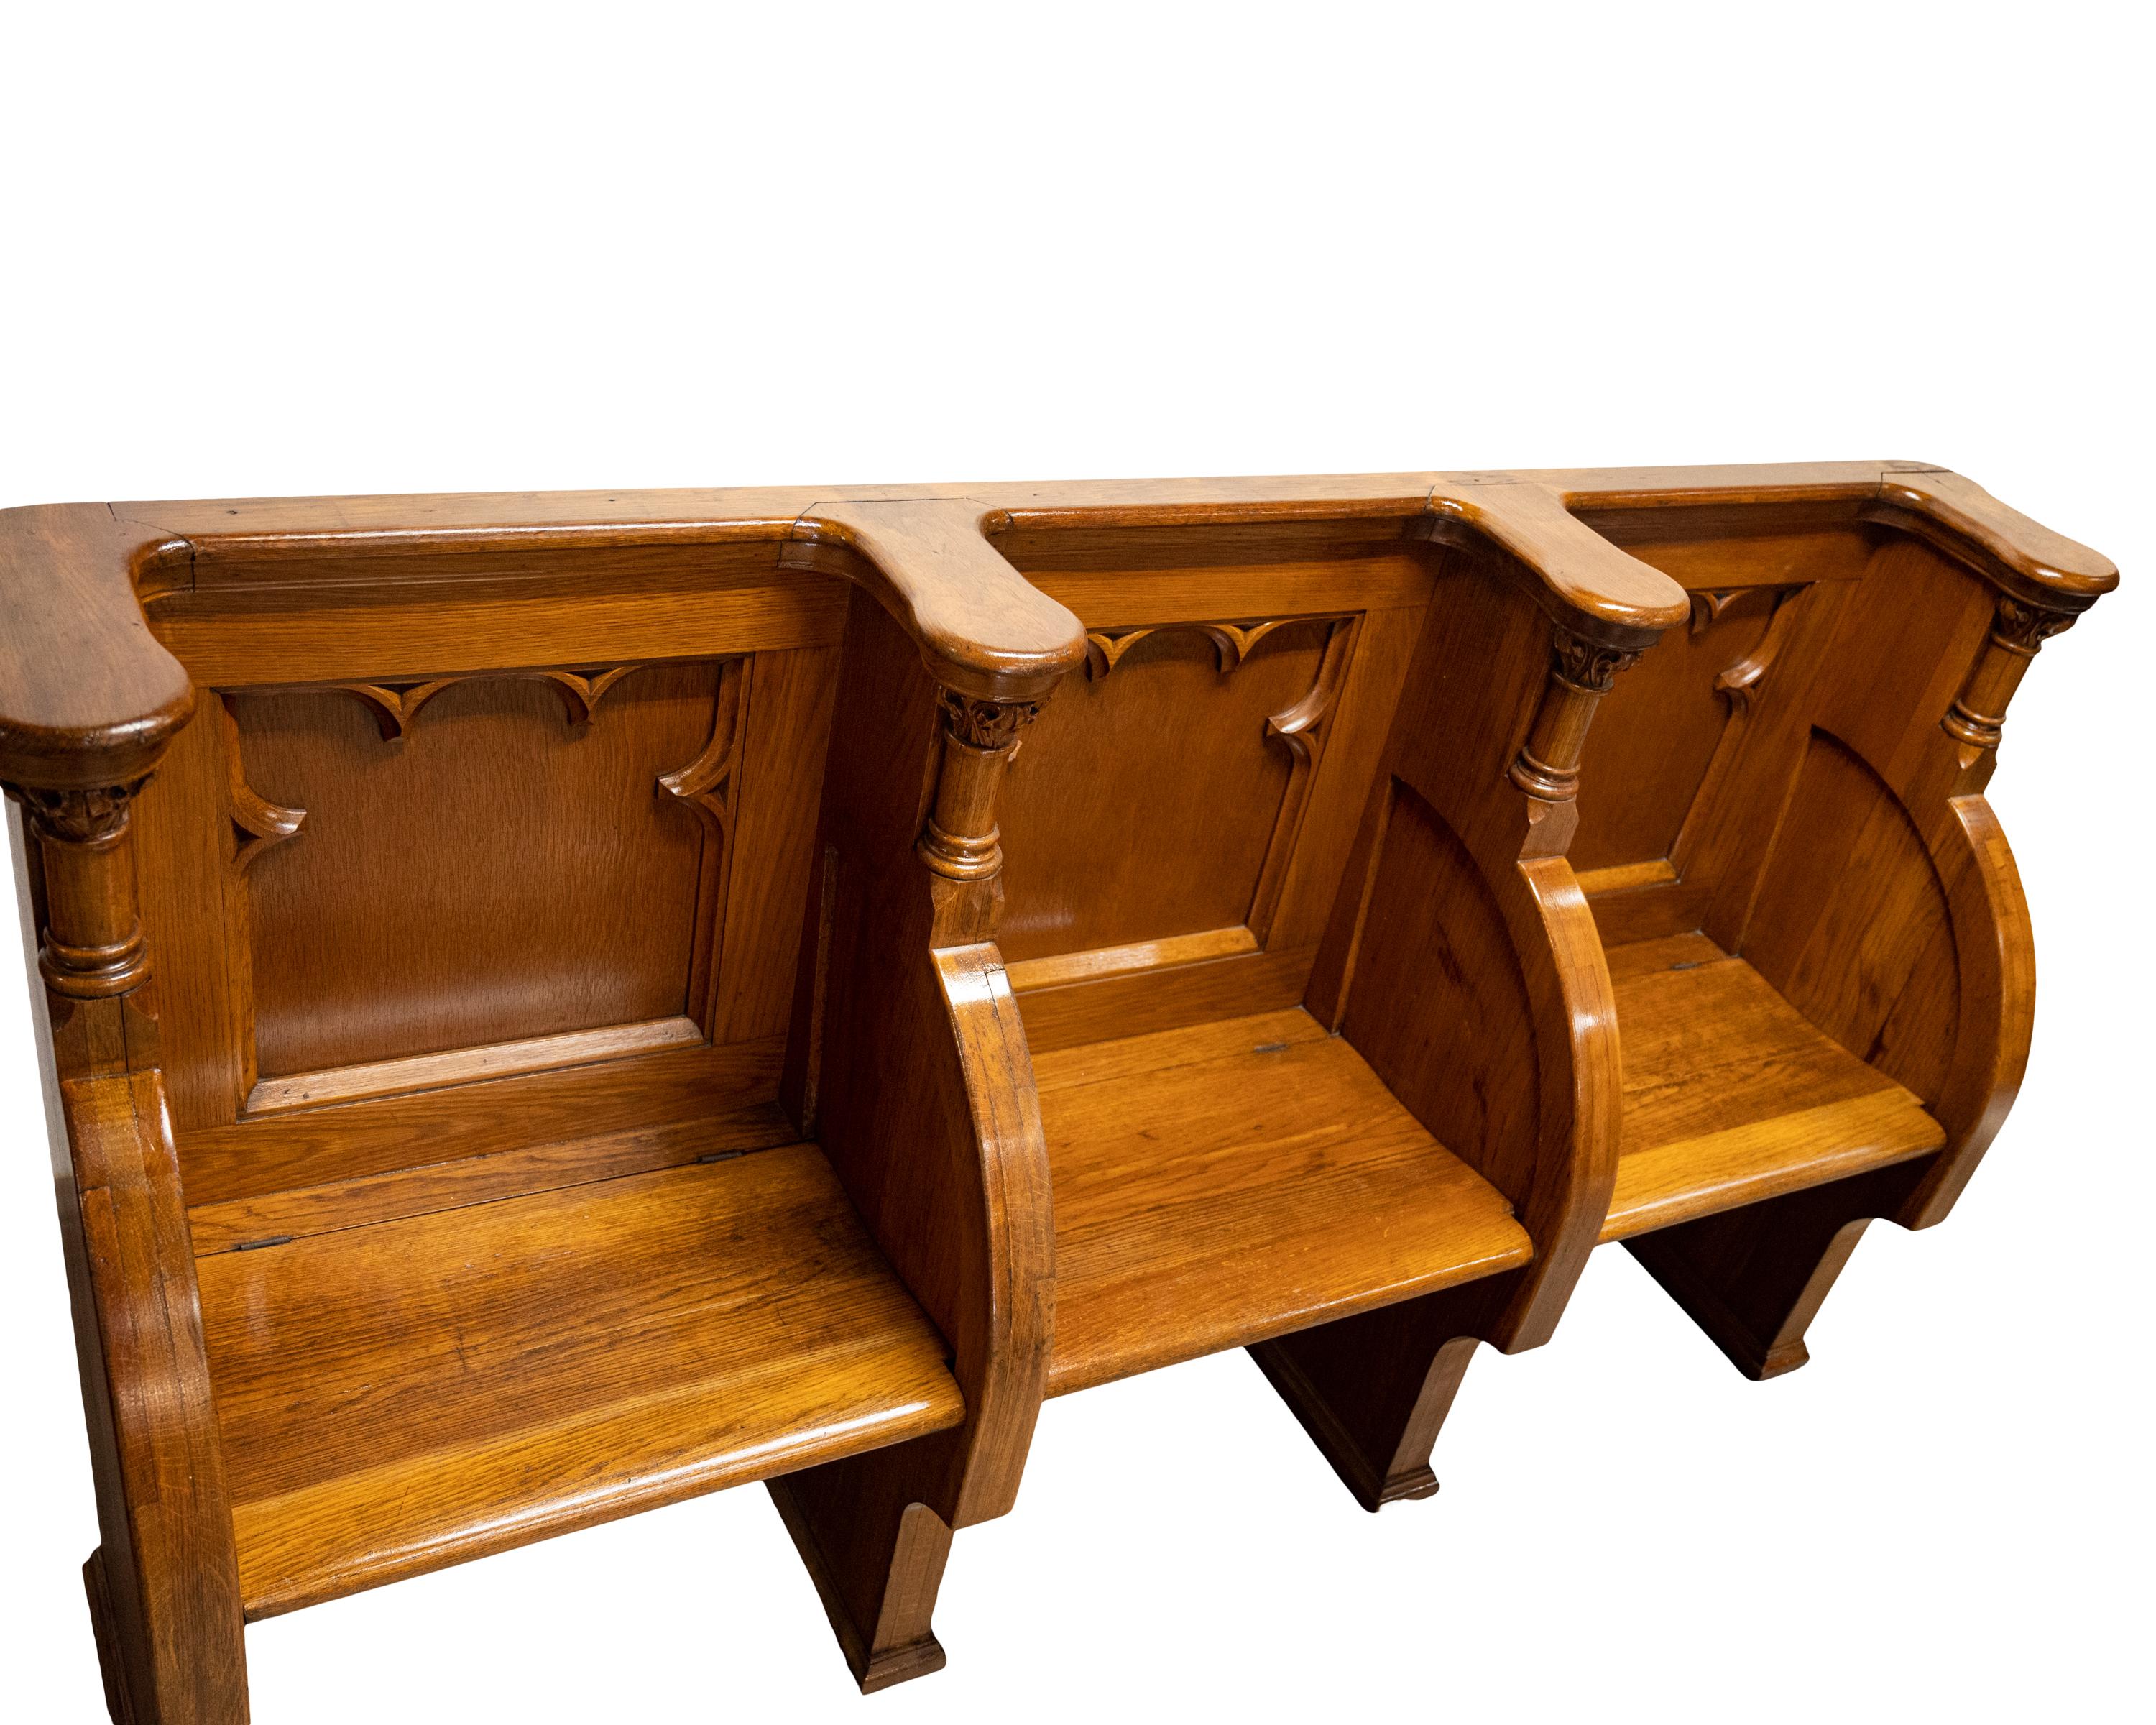 Antique Gothic Revival Pugin Carved Oak Church 3 Seat Pew Bench Choir Stall 1850 7